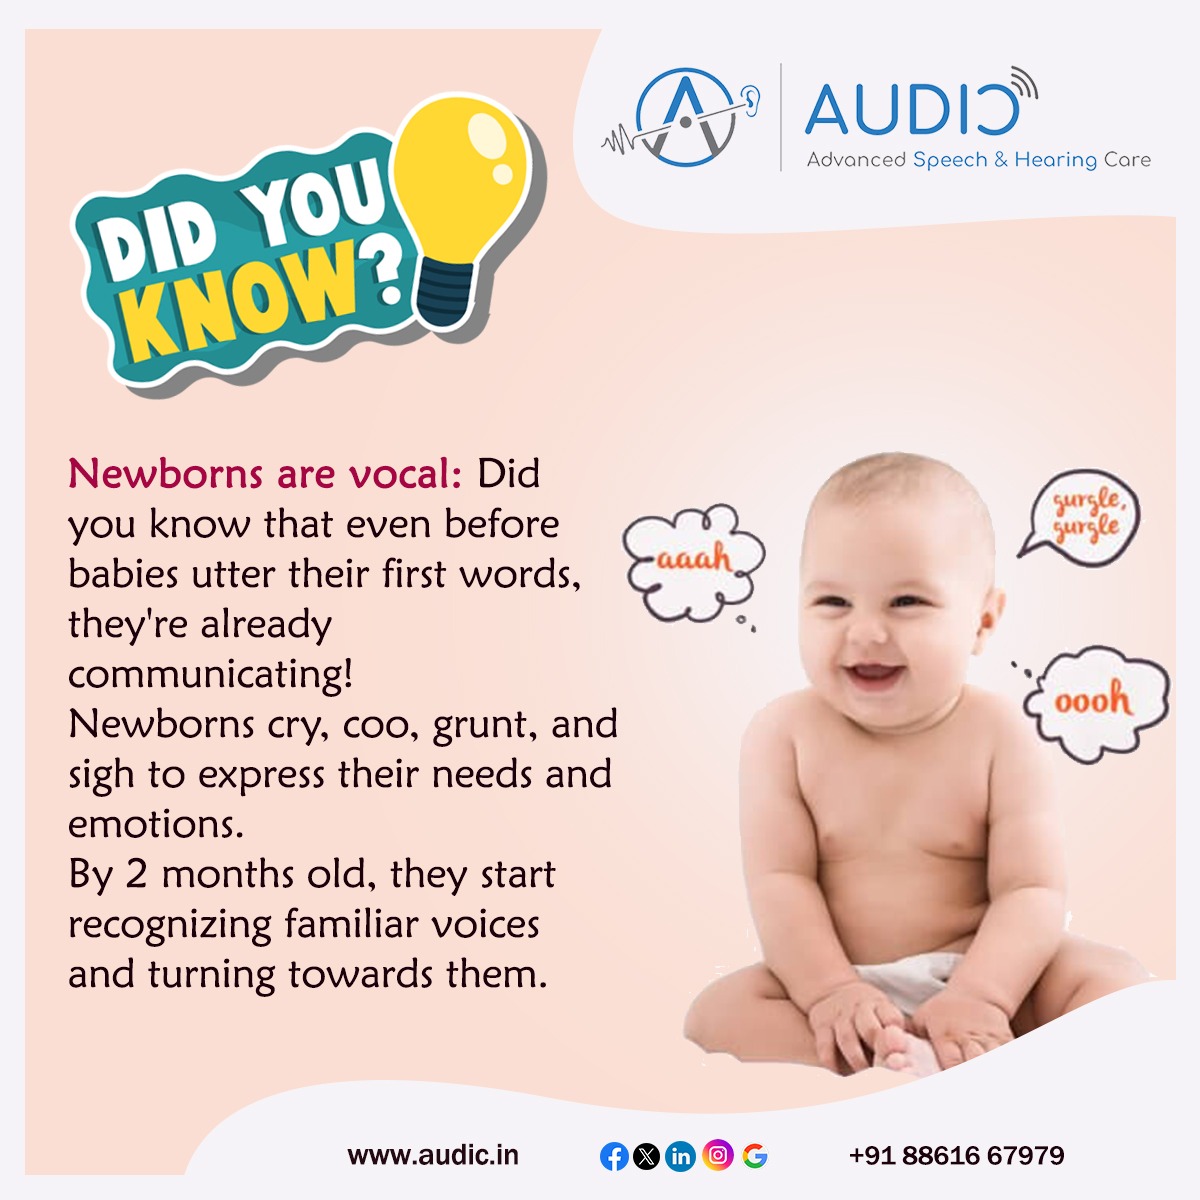 Absolutely! It's fascinating how babies communicate from the get-go. Crying is their primary means of communication at first, indicating hunger, discomfort, or the need for attention. 

#Audic
#AudicMysore
#FunFacts
#DidYouKnowThat
#TriviaTime
#FactsOnly
#KnowledgeNuggets